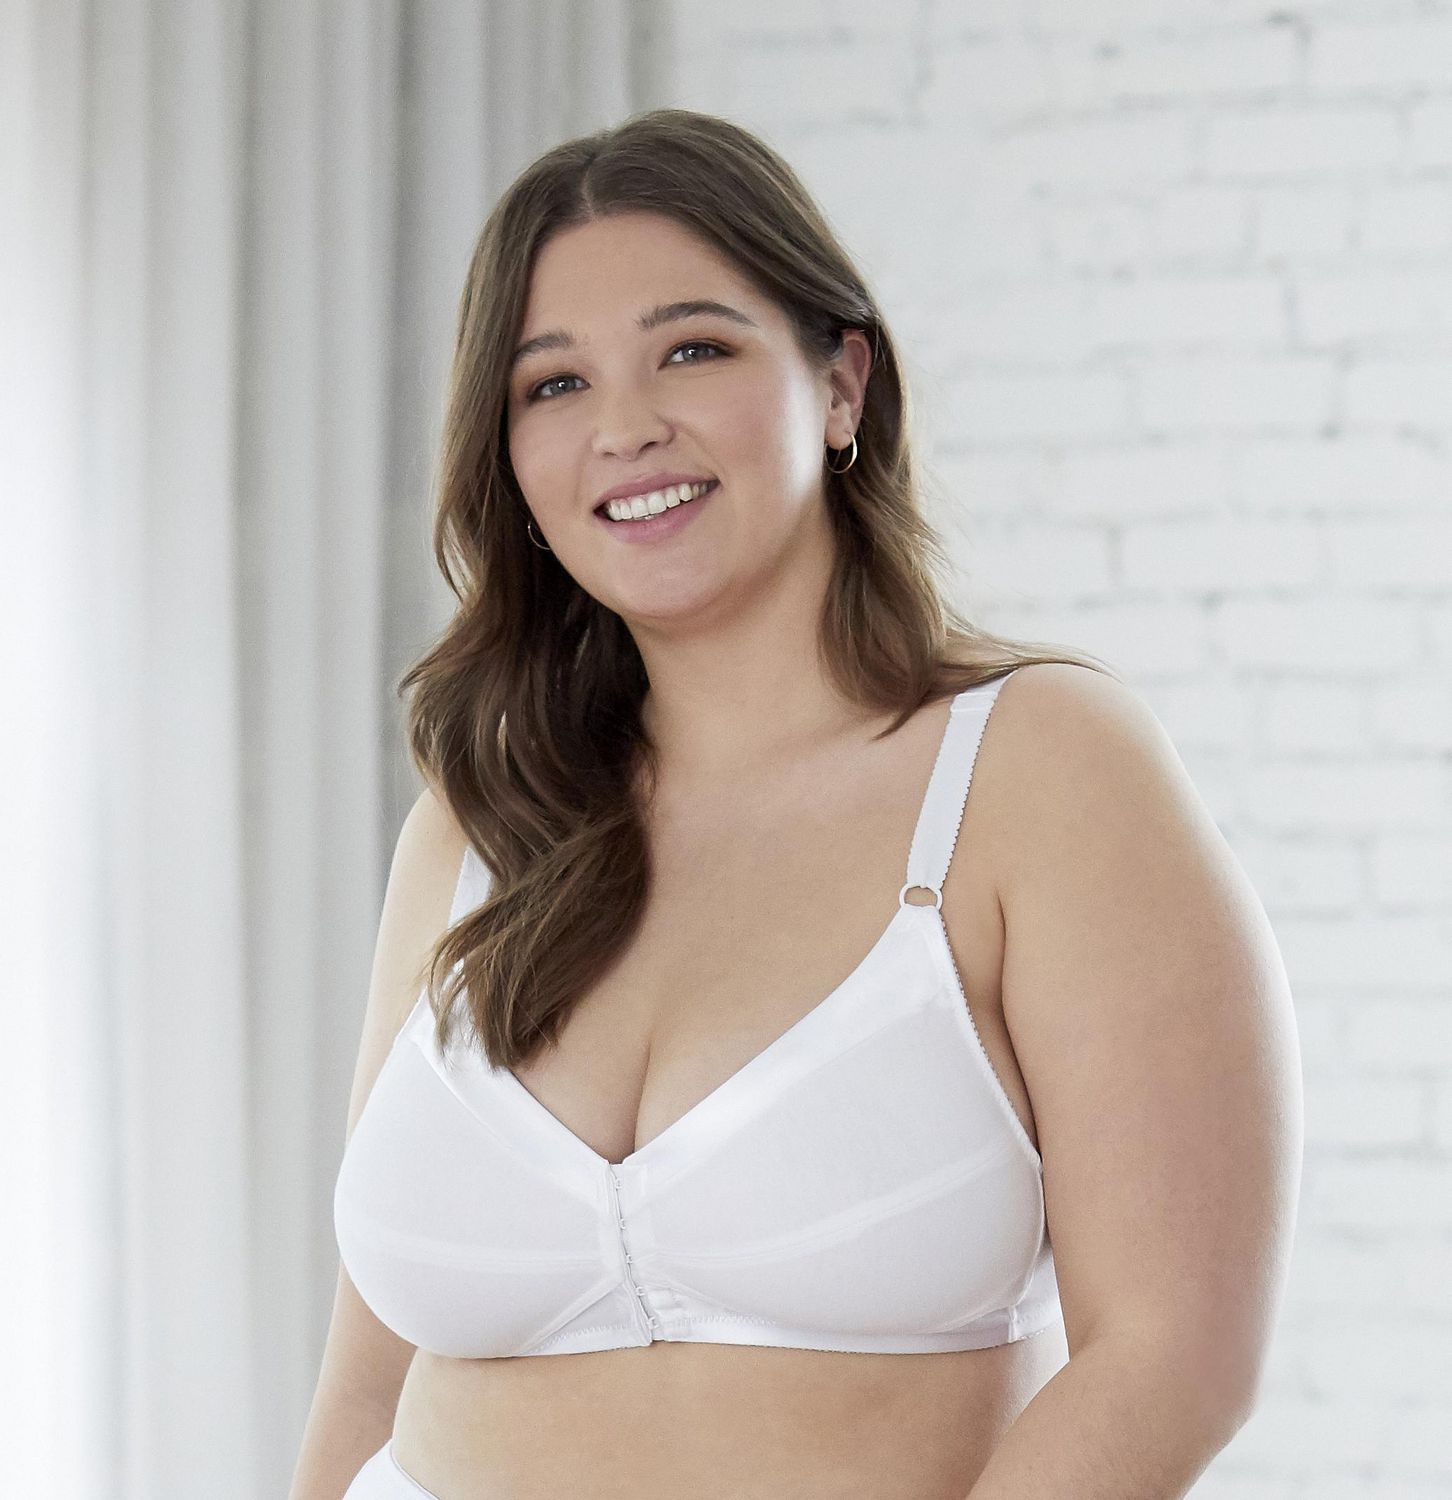 Bestform 9706770 Comfortable Unlined Wireless Cotton Bra with Front  Closure, Sizes 36B-42D 